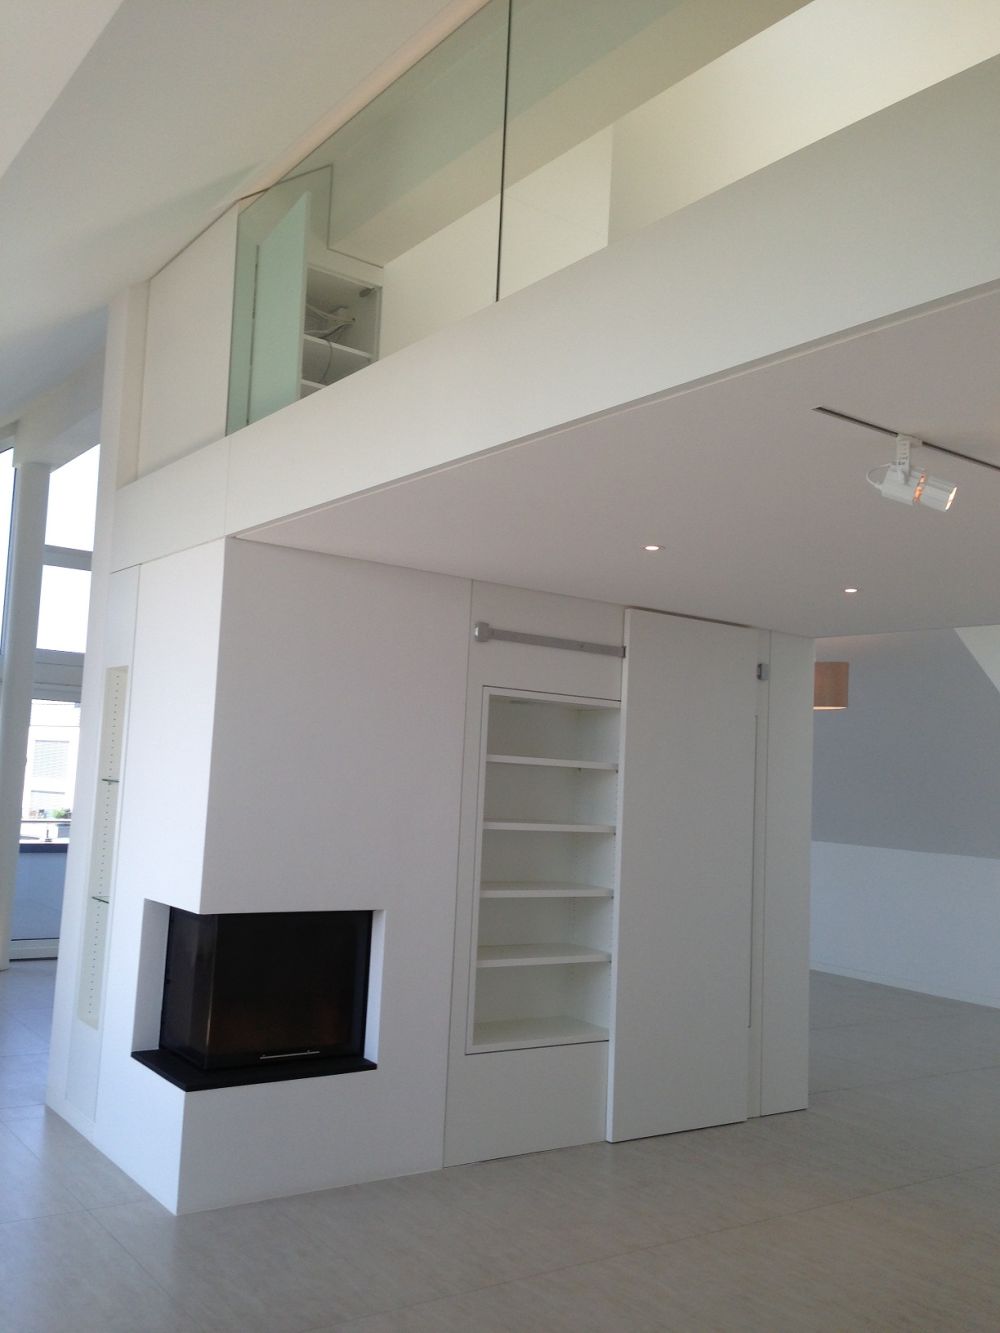 Luxembourg-Belair - for sale : Apartment